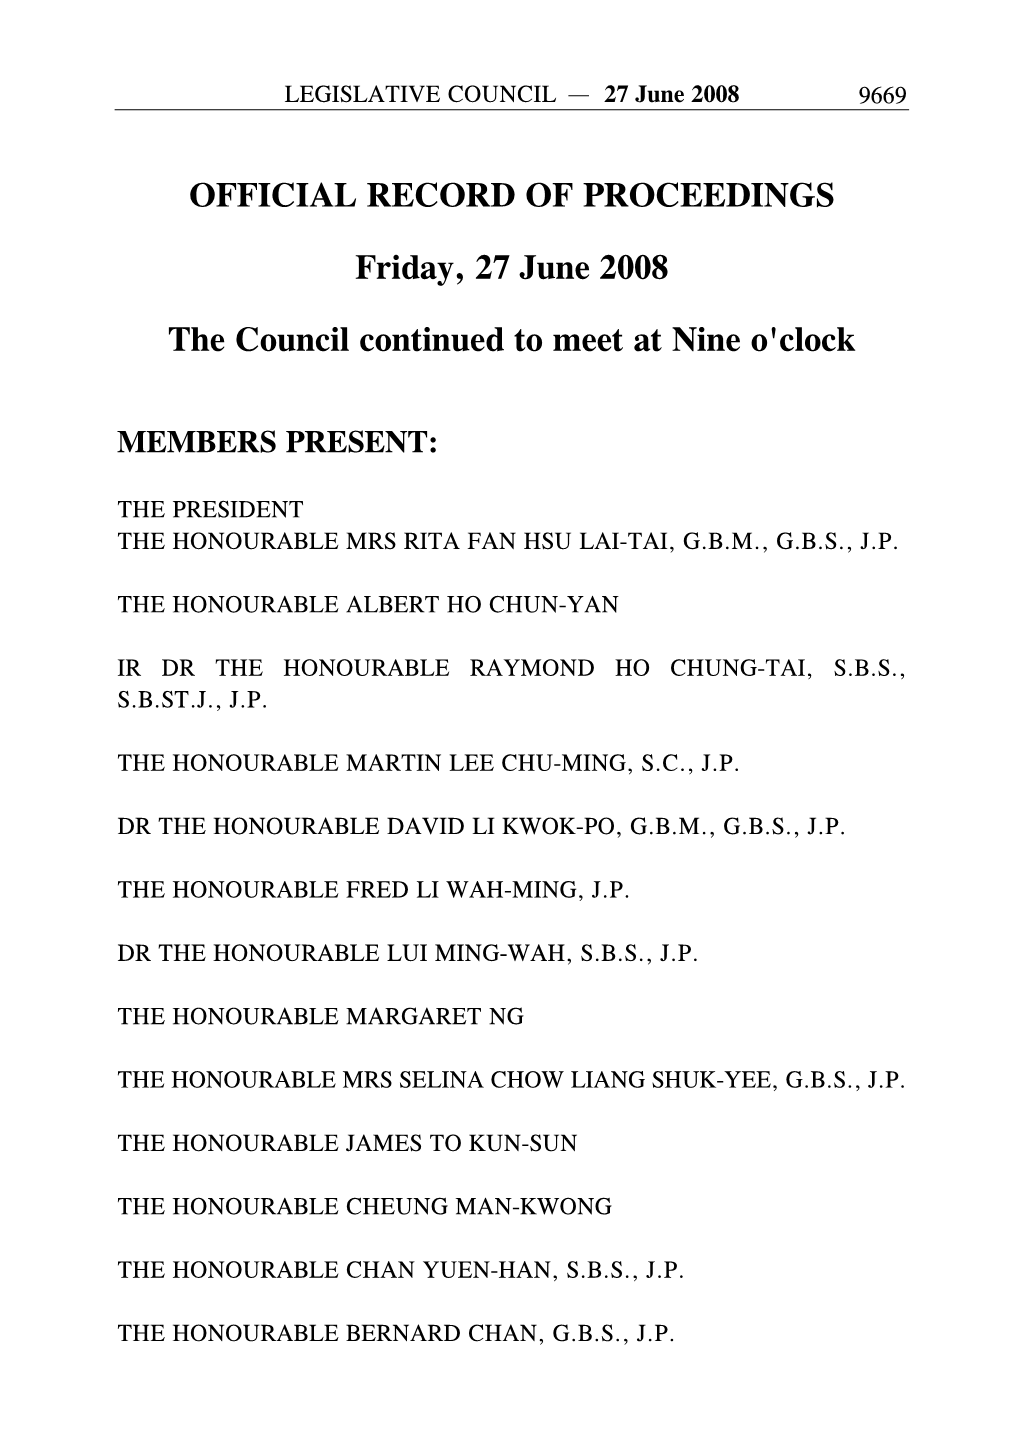 OFFICIAL RECORD of PROCEEDINGS Friday, 27 June